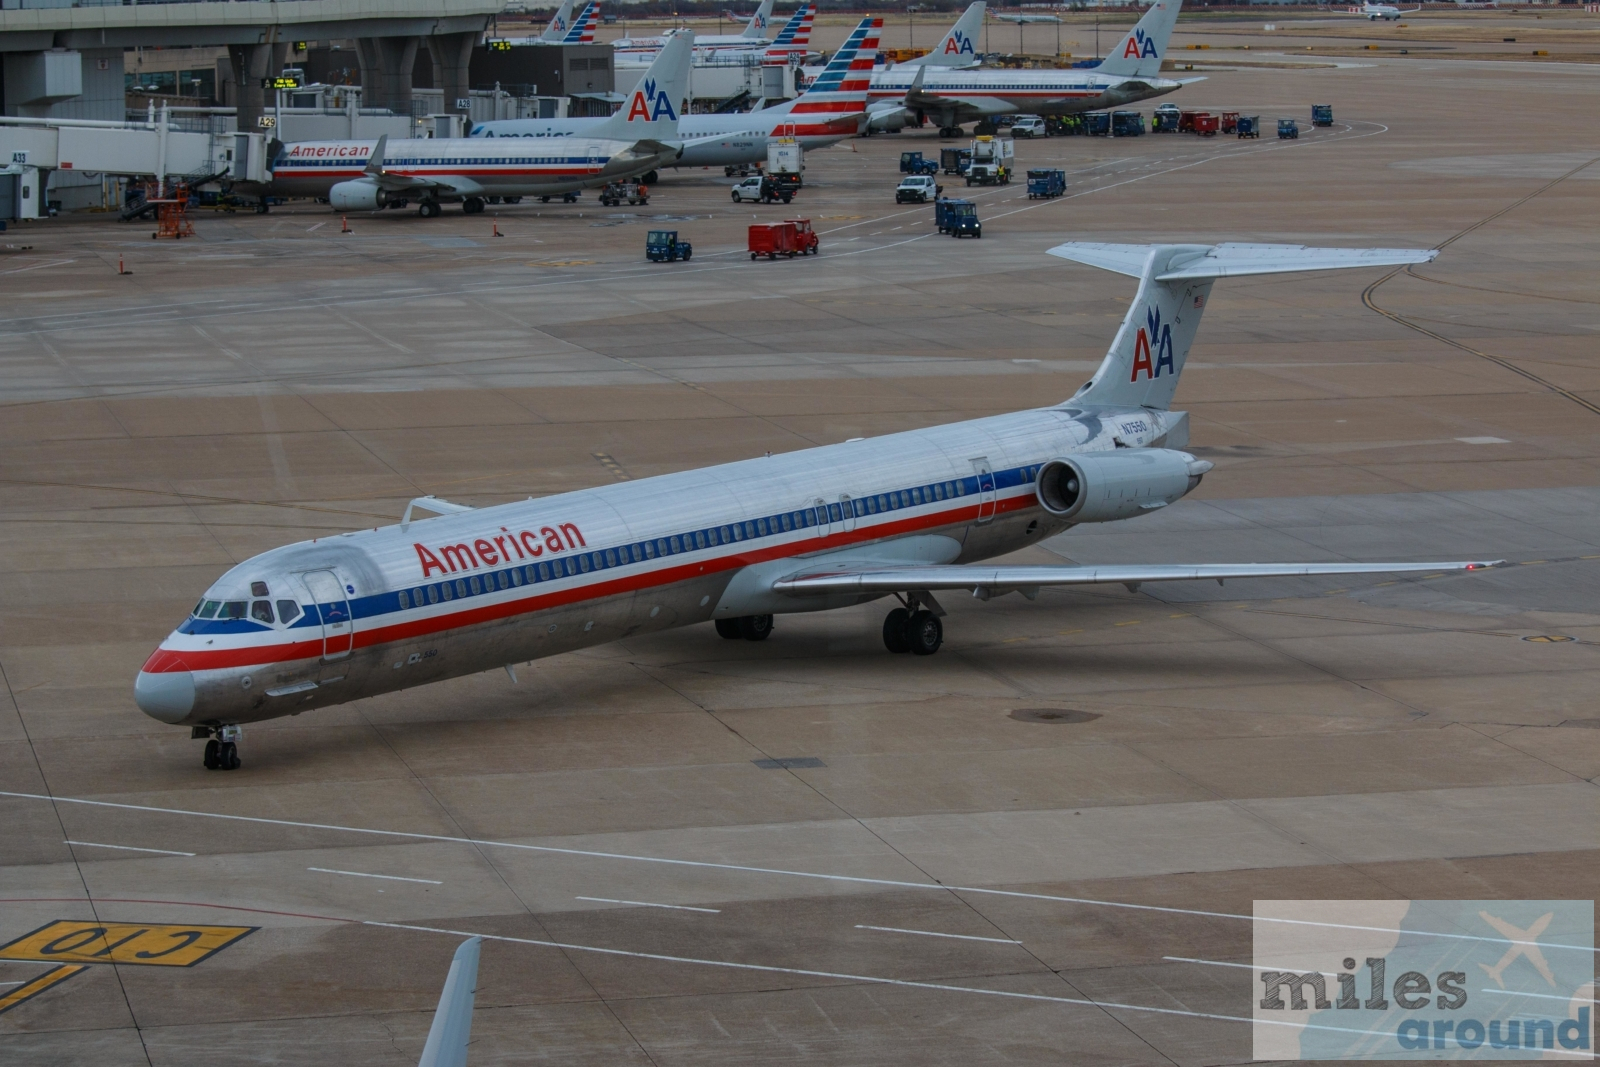 Read more about the article American Airlines Economy Class in der MD-82 “Mad Dog” nach Dallas